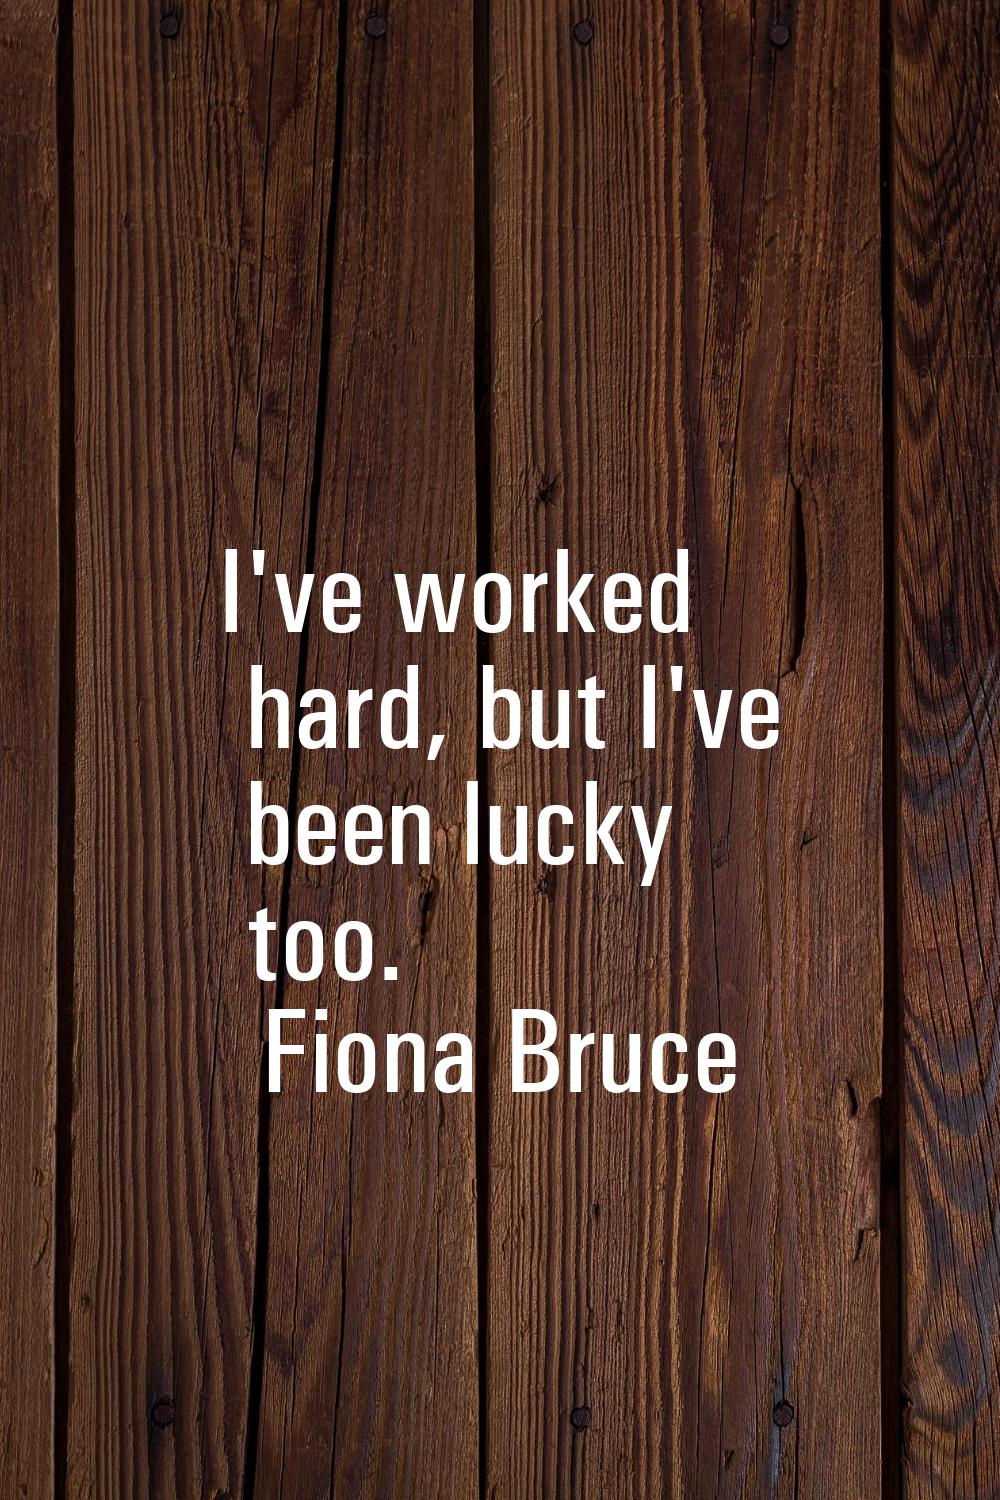 I've worked hard, but I've been lucky too.